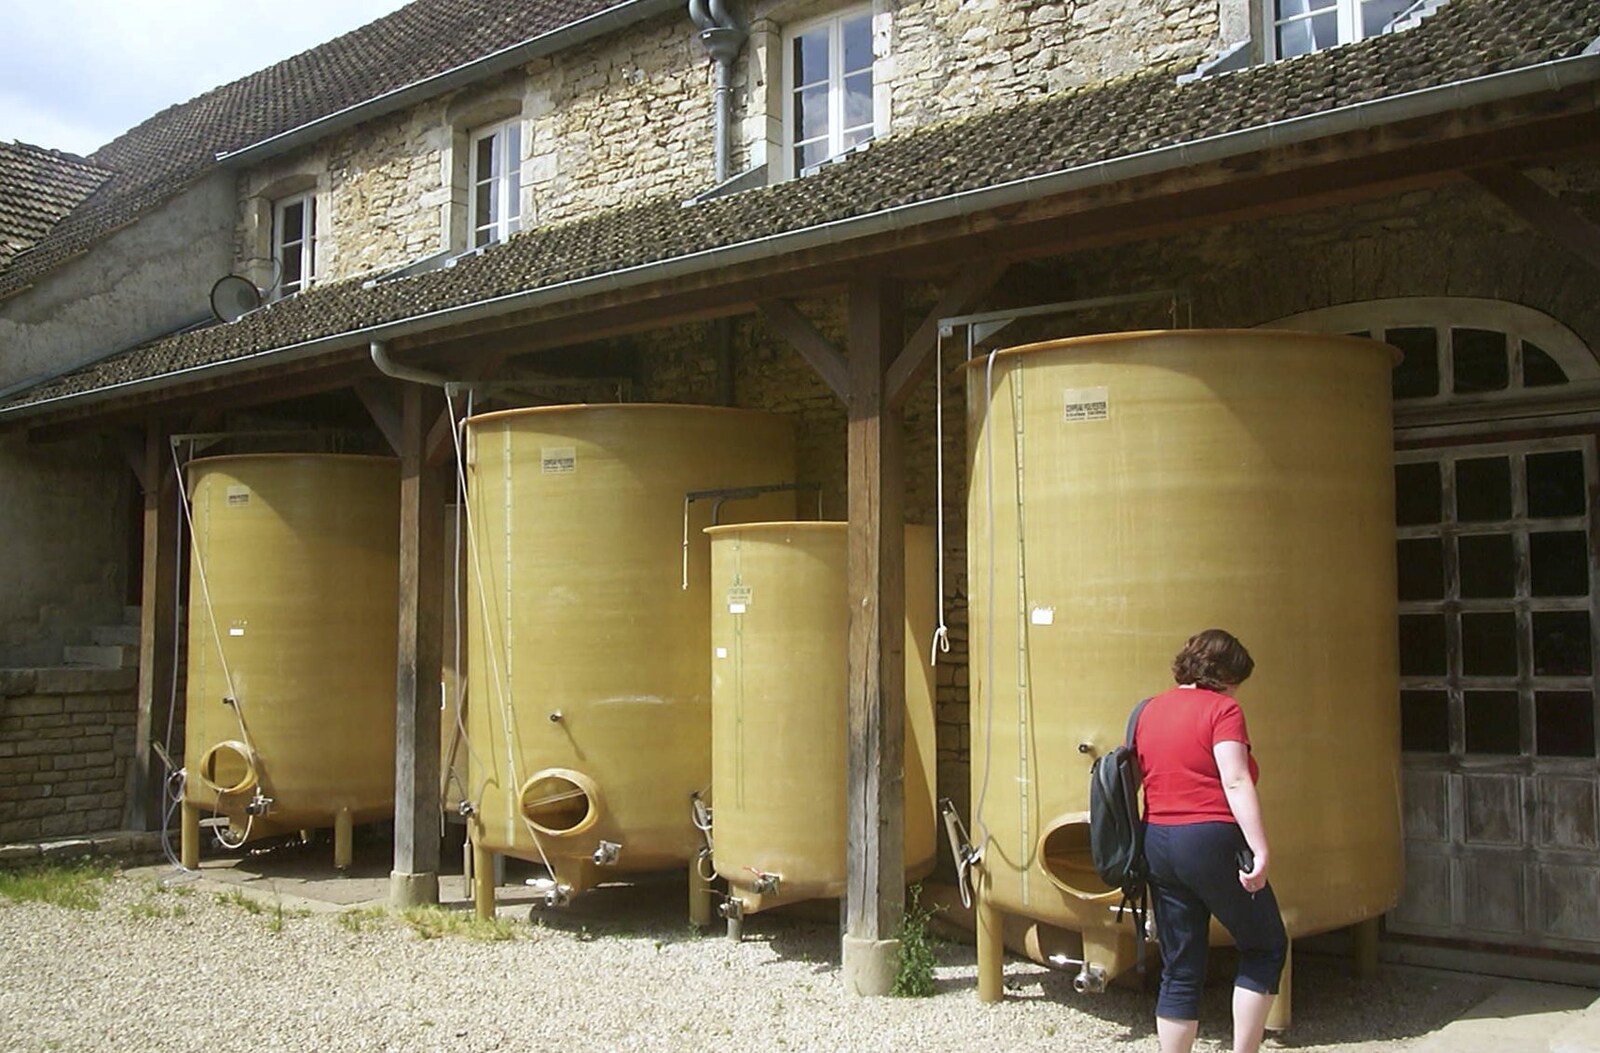 Sis roams around by old fermentation tanks from A Short Holiday in Chivres, Burgundy, France - 21st July 2001